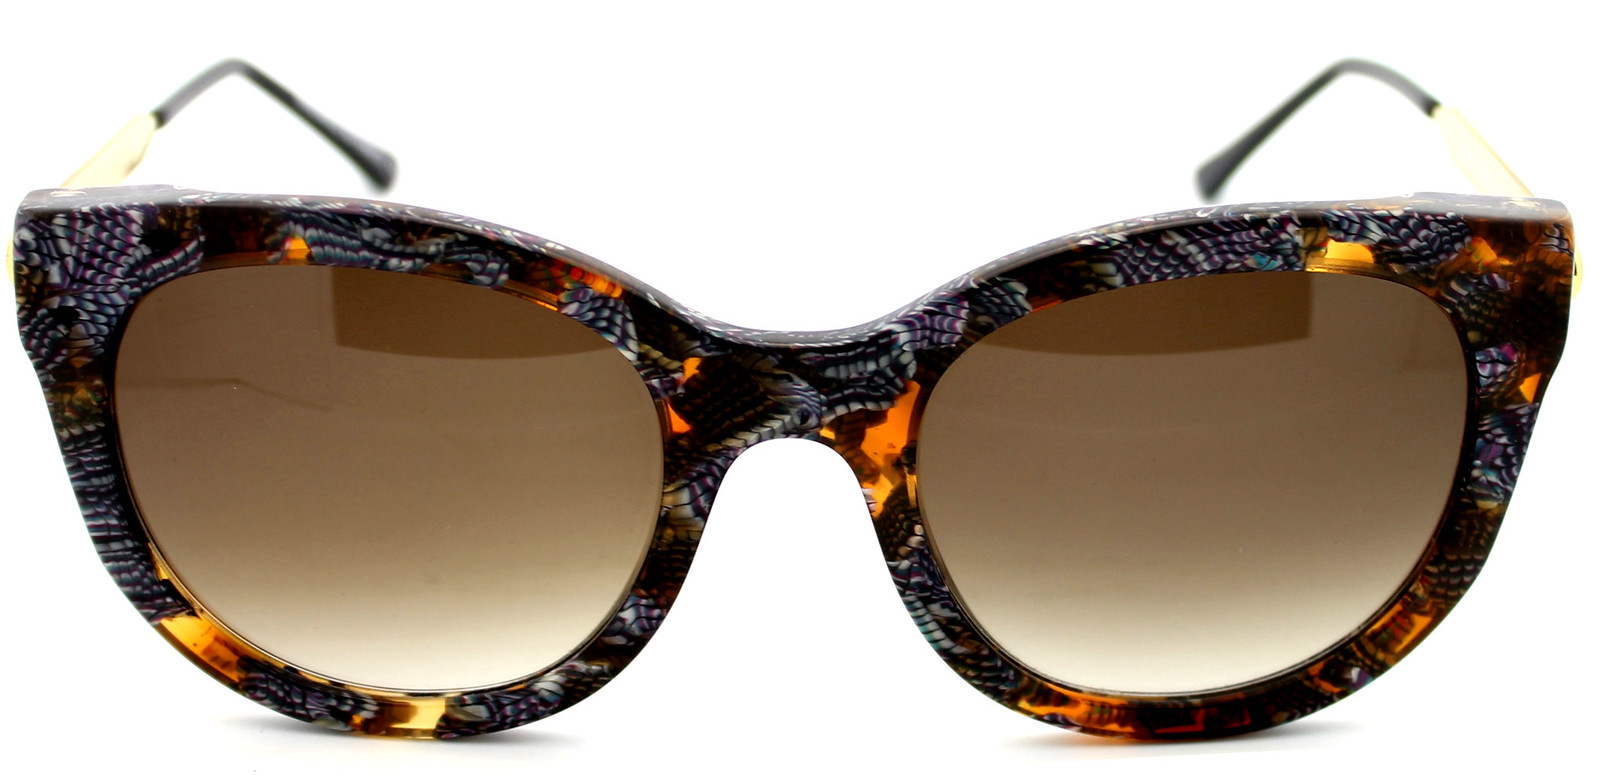 SPECTACLE LOVES YOU.: Thierry Lasry x Spectacle Eyewear Collaboration